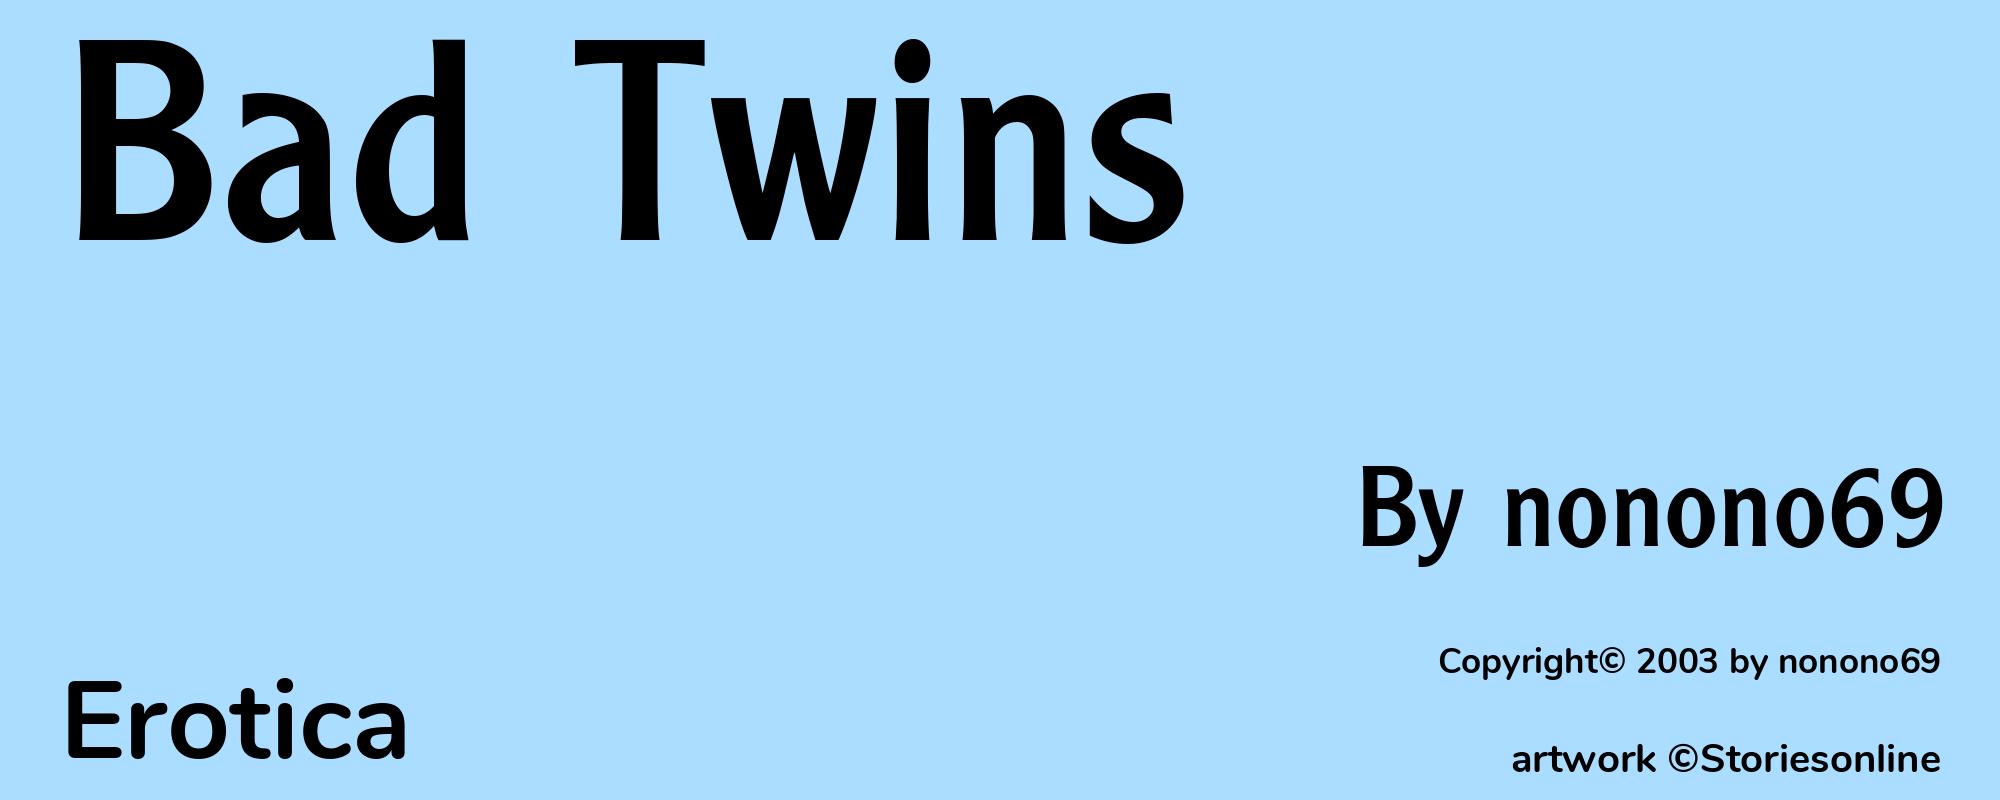 Bad Twins - Cover